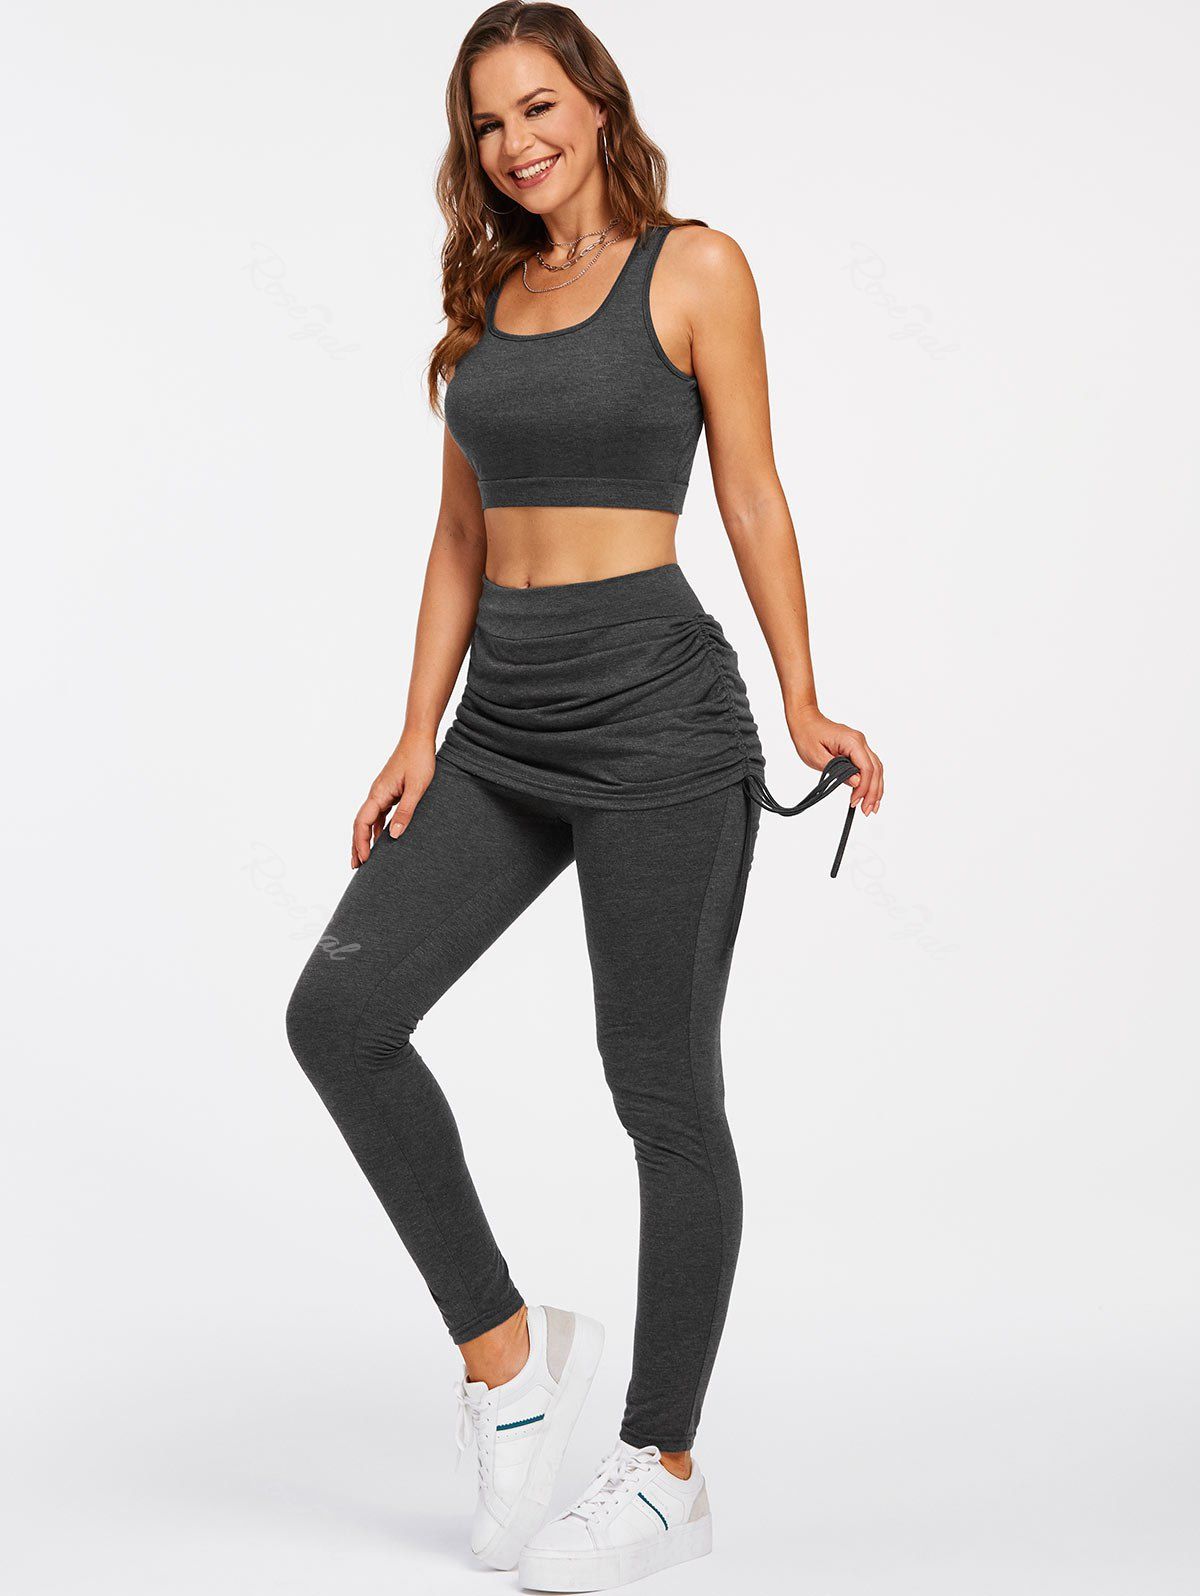 Trendy Cut Out Crop Top and Fold Over Cinched Skinny Pants  